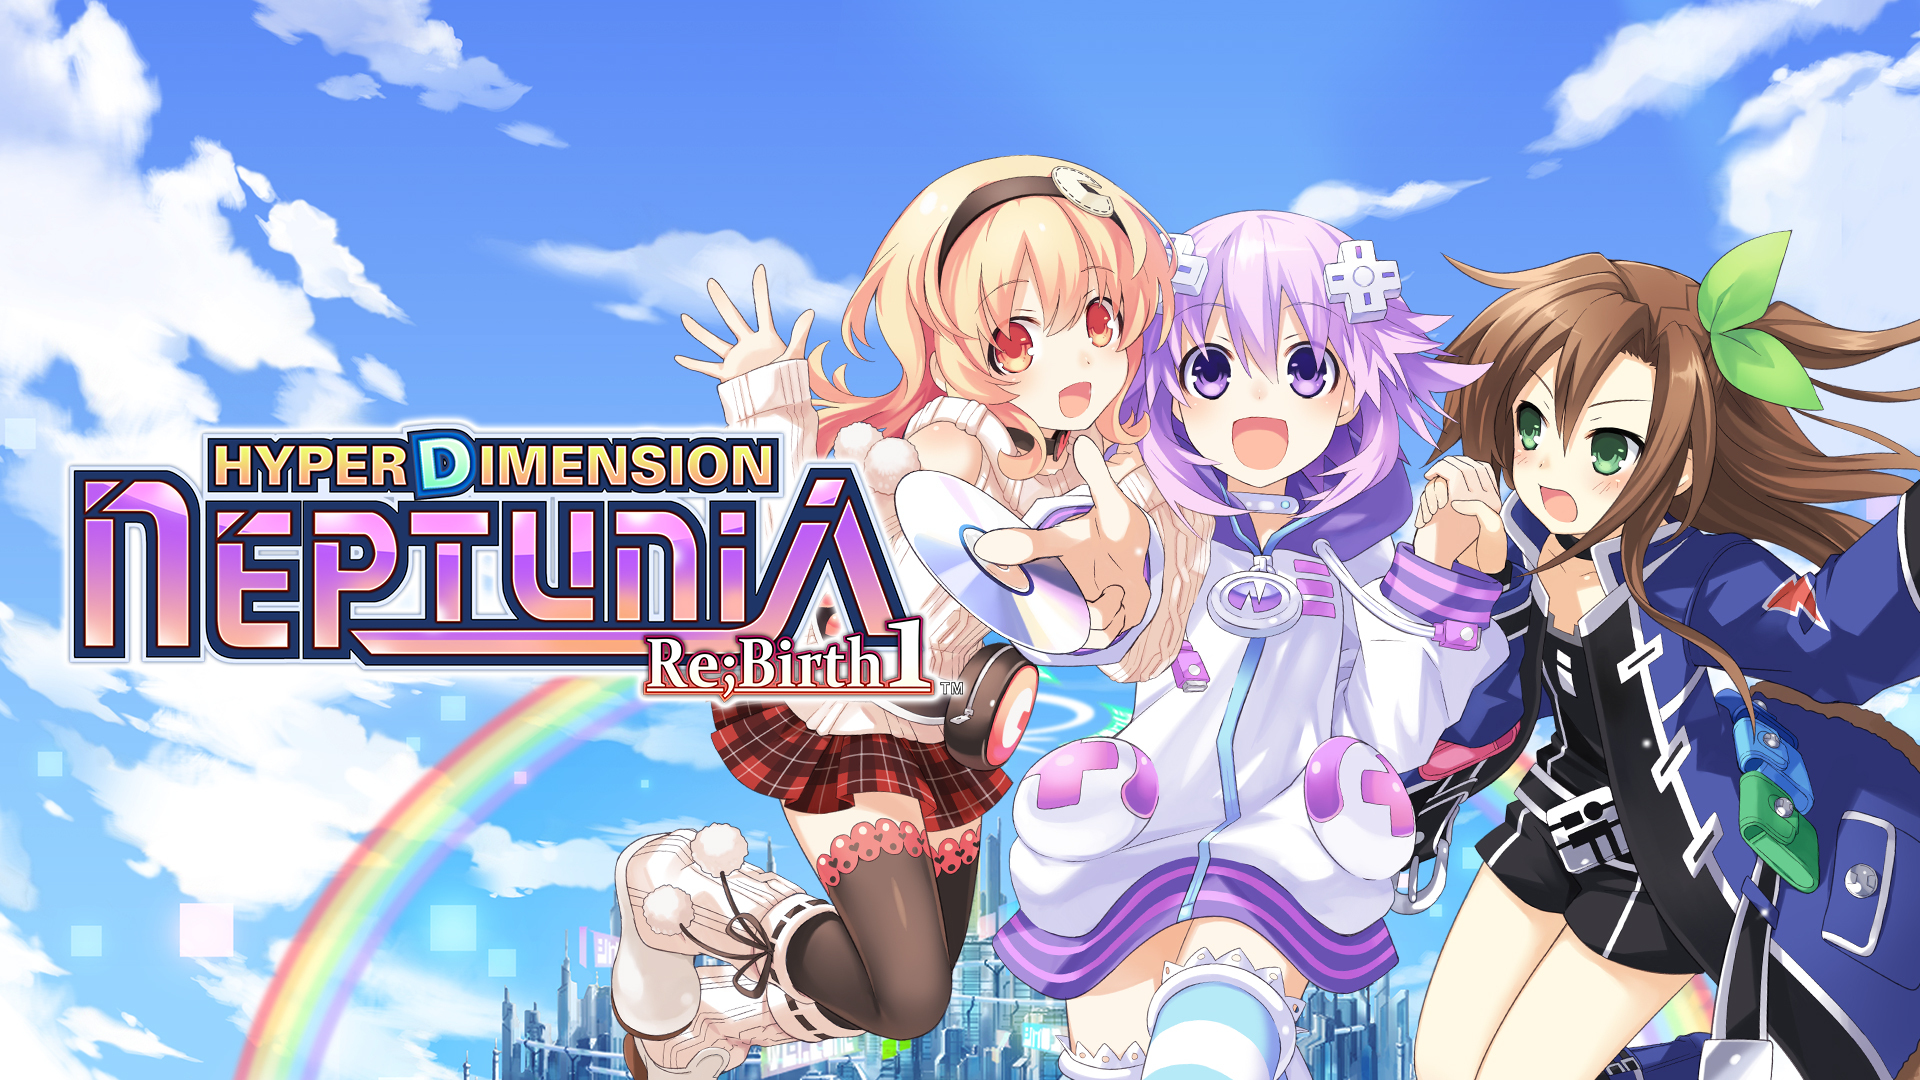 Hyperdimension Neptunia Re;Birth Series Coming to Switch Later This Year